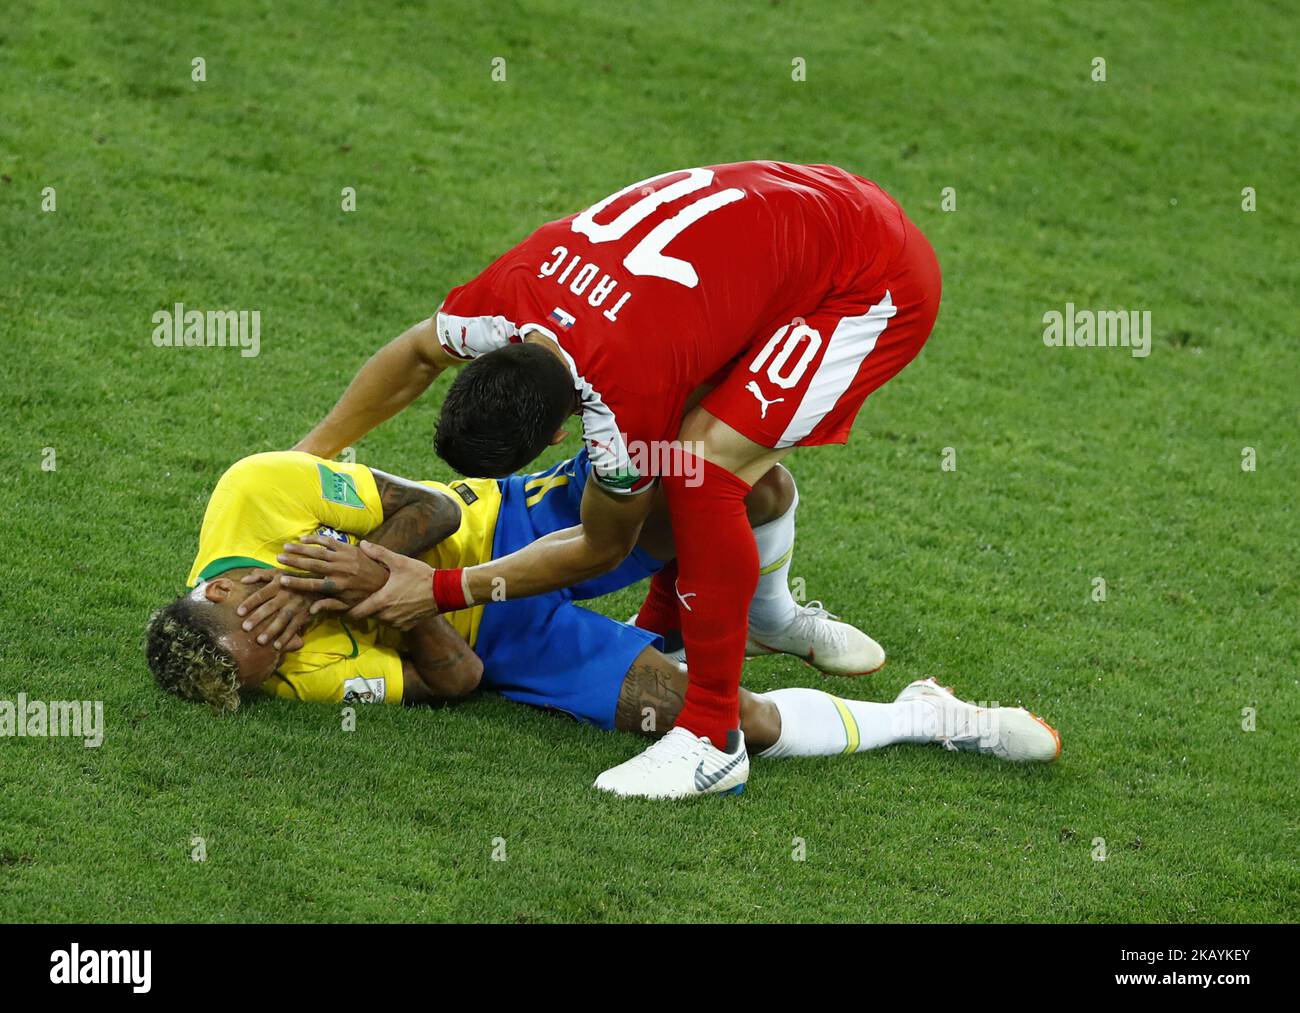 Group E Serbia v Brazil - FIFA World Cup Russia 2018 Neymar (Brazil) and Dusan Tadic (Serbia) after a tackle at Spartak Stadium in Moscow, Russia on June 27, 2018. (Photo by Matteo Ciambelli/NurPhoto)  Stock Photo